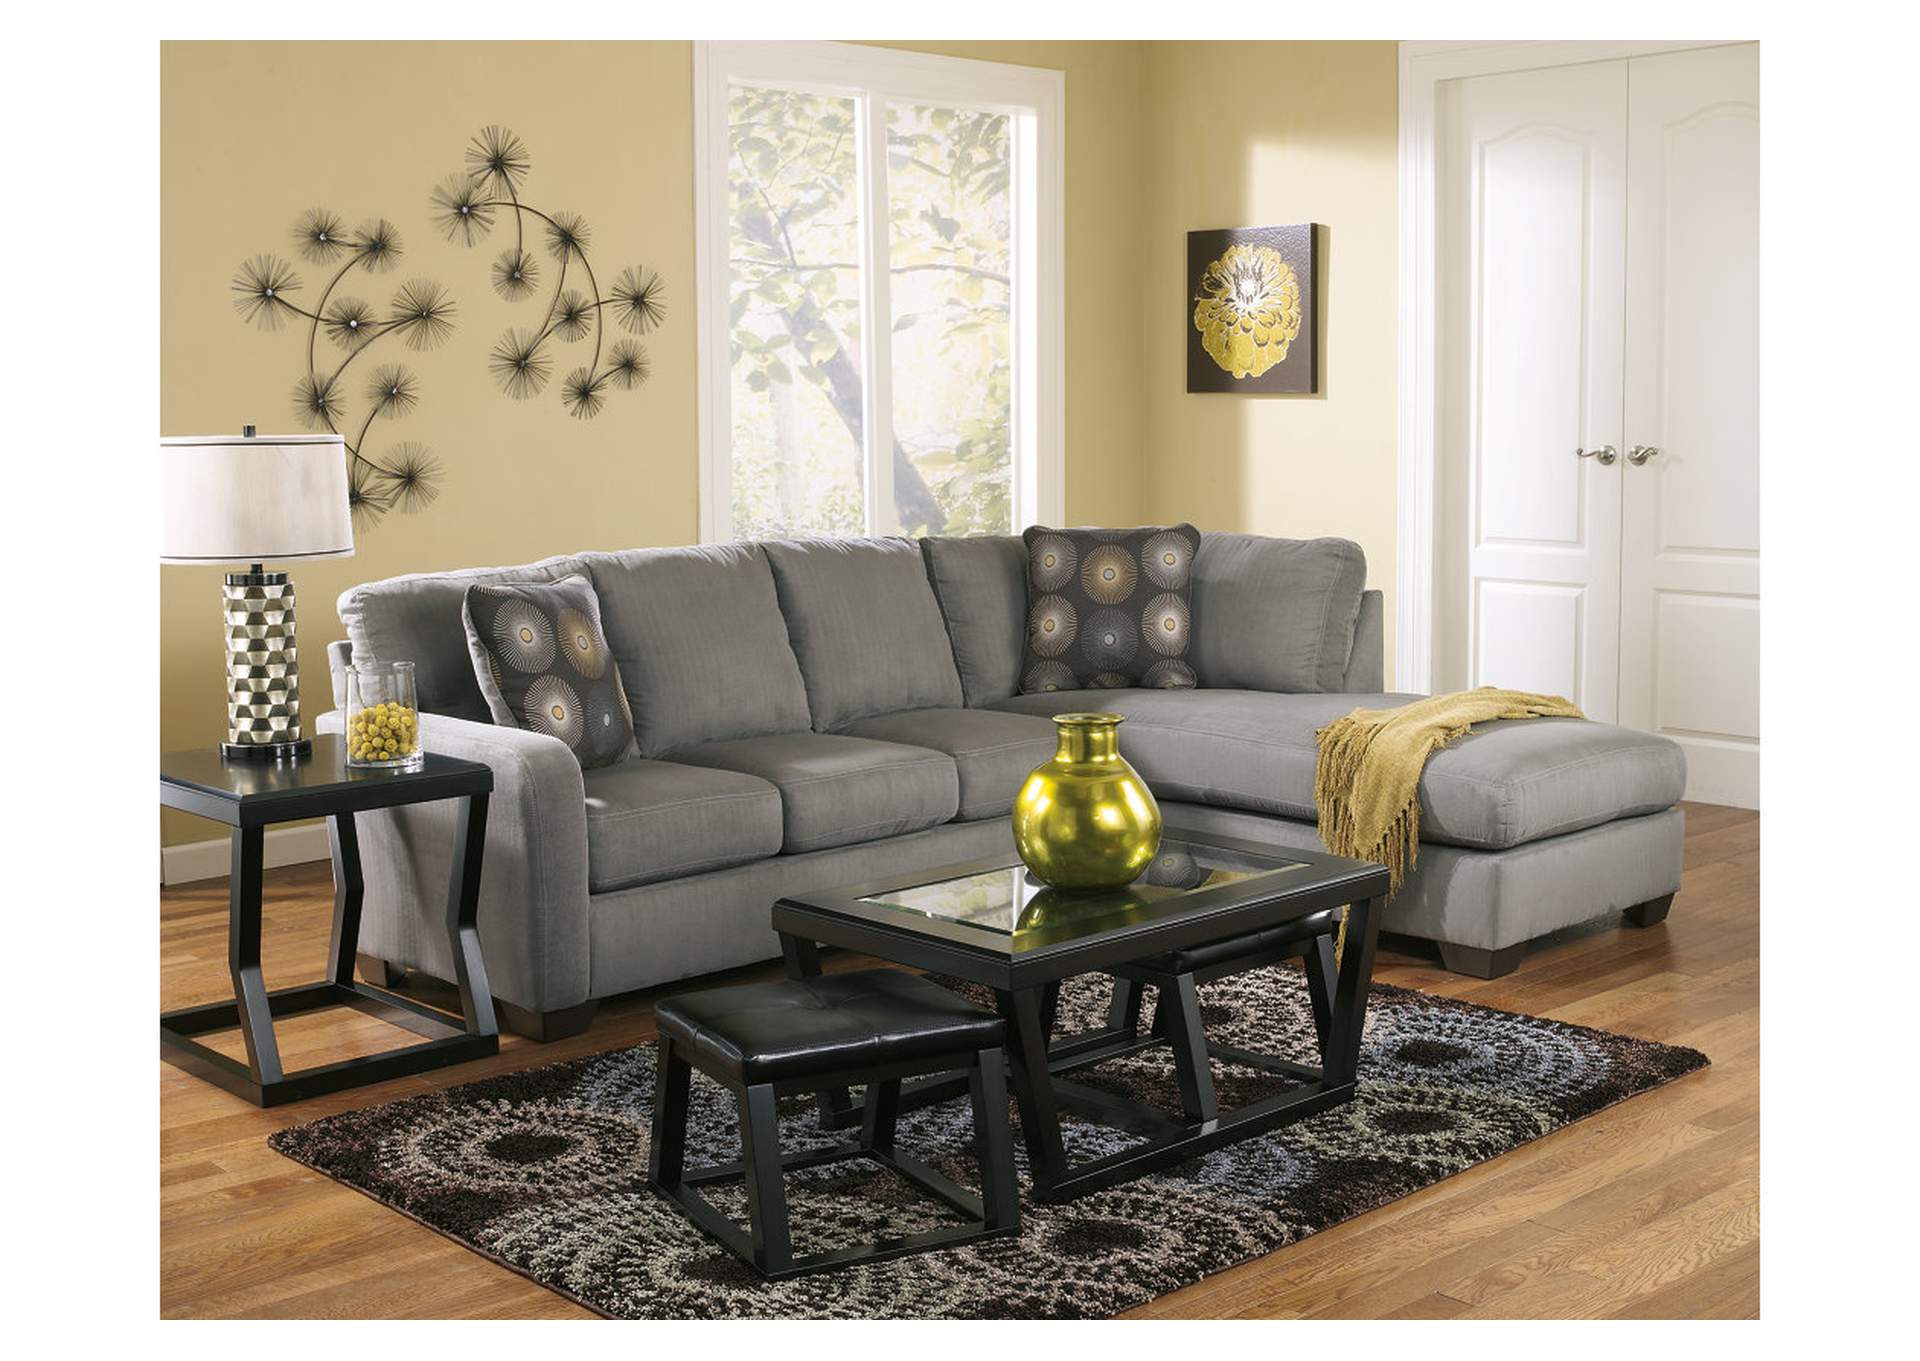 Zella 2-Piece Sectional with Chaise,Signature Design By Ashley